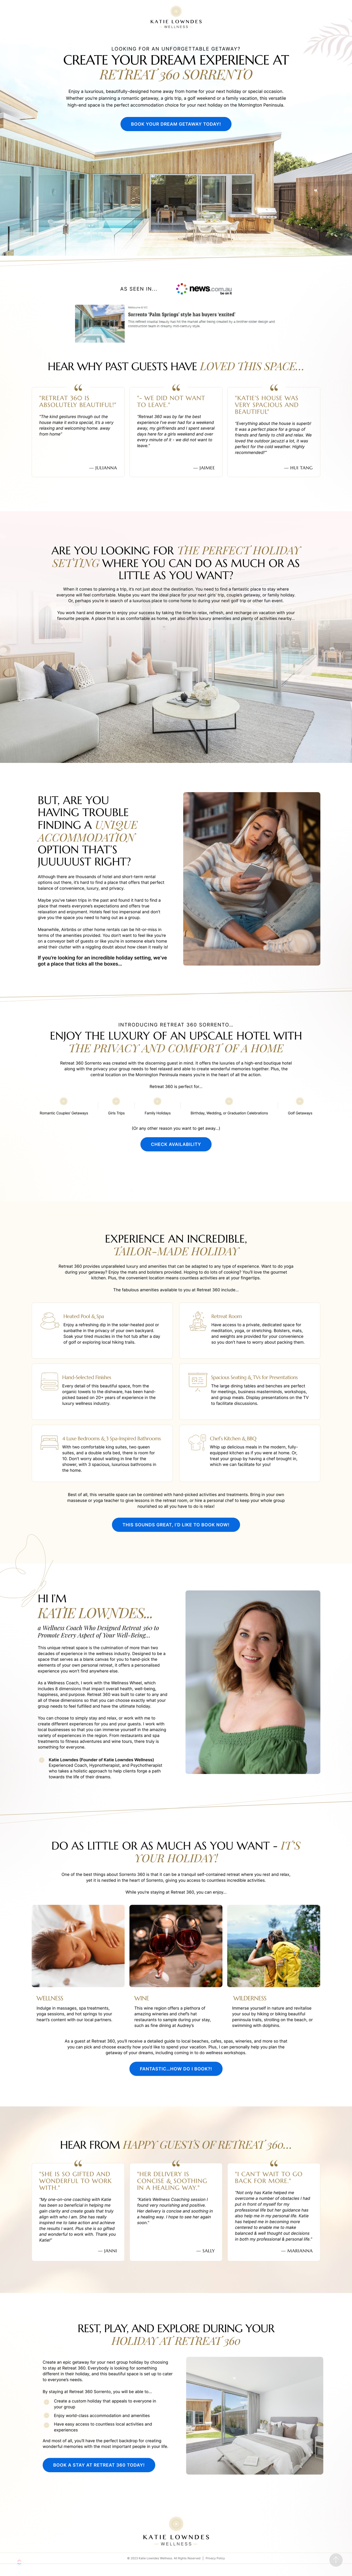 Katie Lowndes - After Landing page